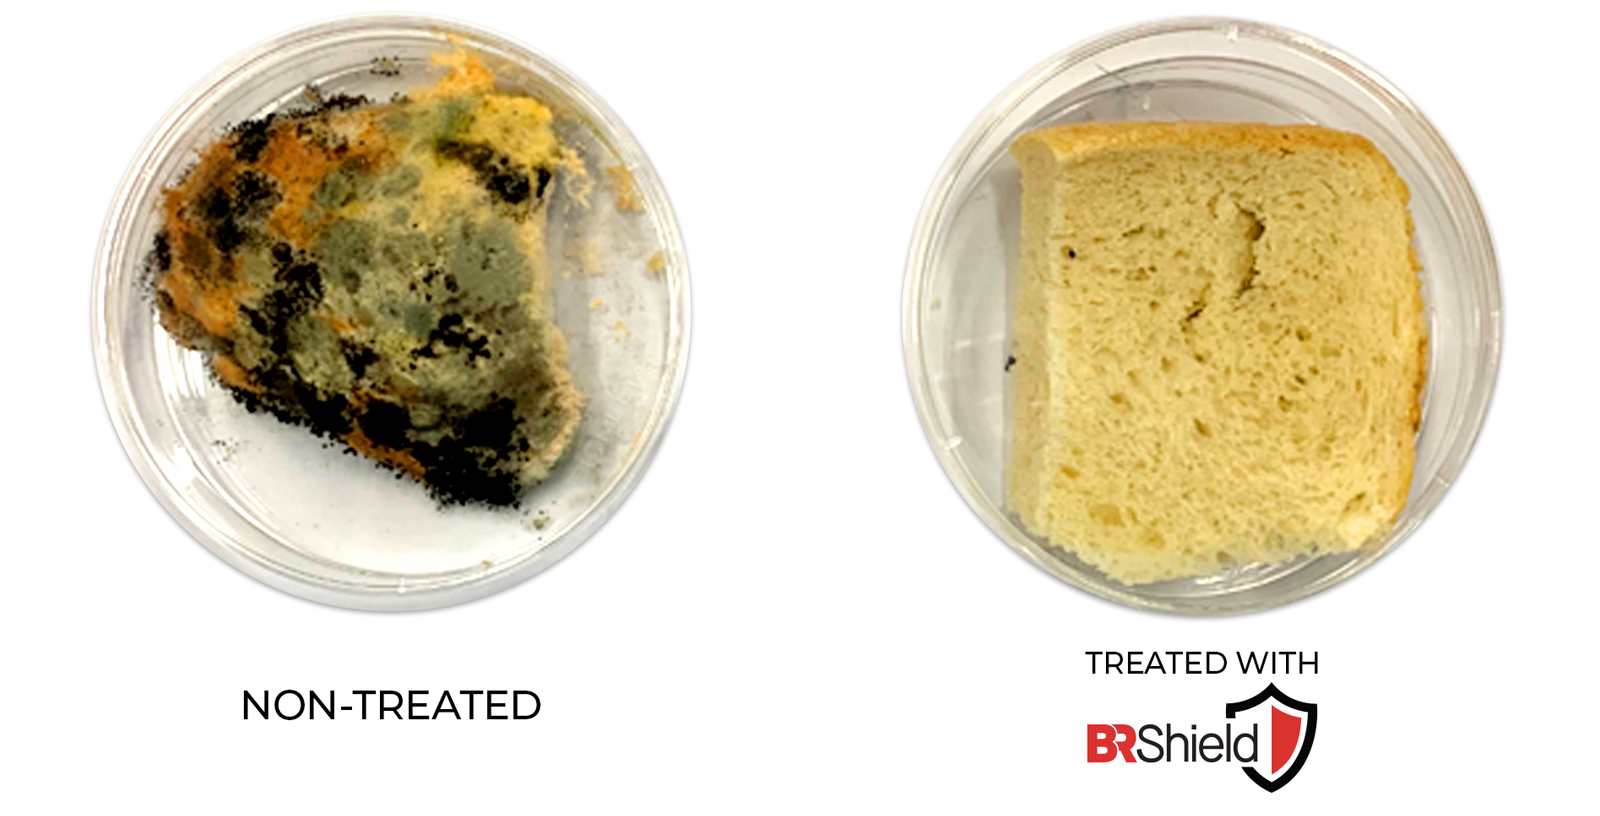 BR Shield Proves Visibly that Surface Coated Inhibits Growth of Germs